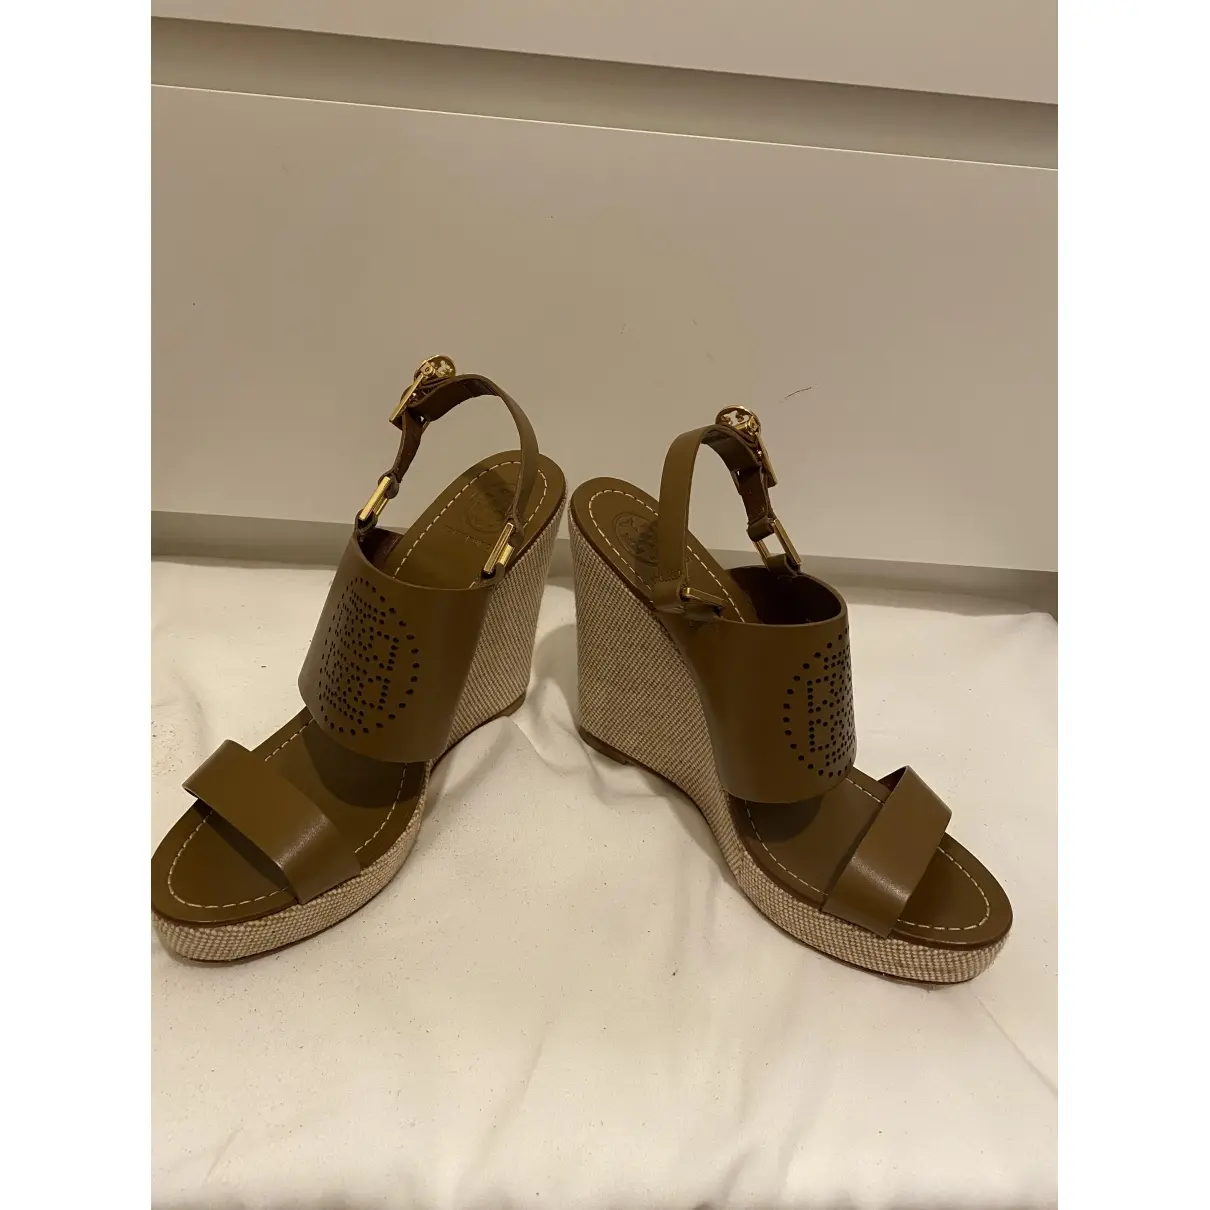 Tory Burch Leather sandal for sale